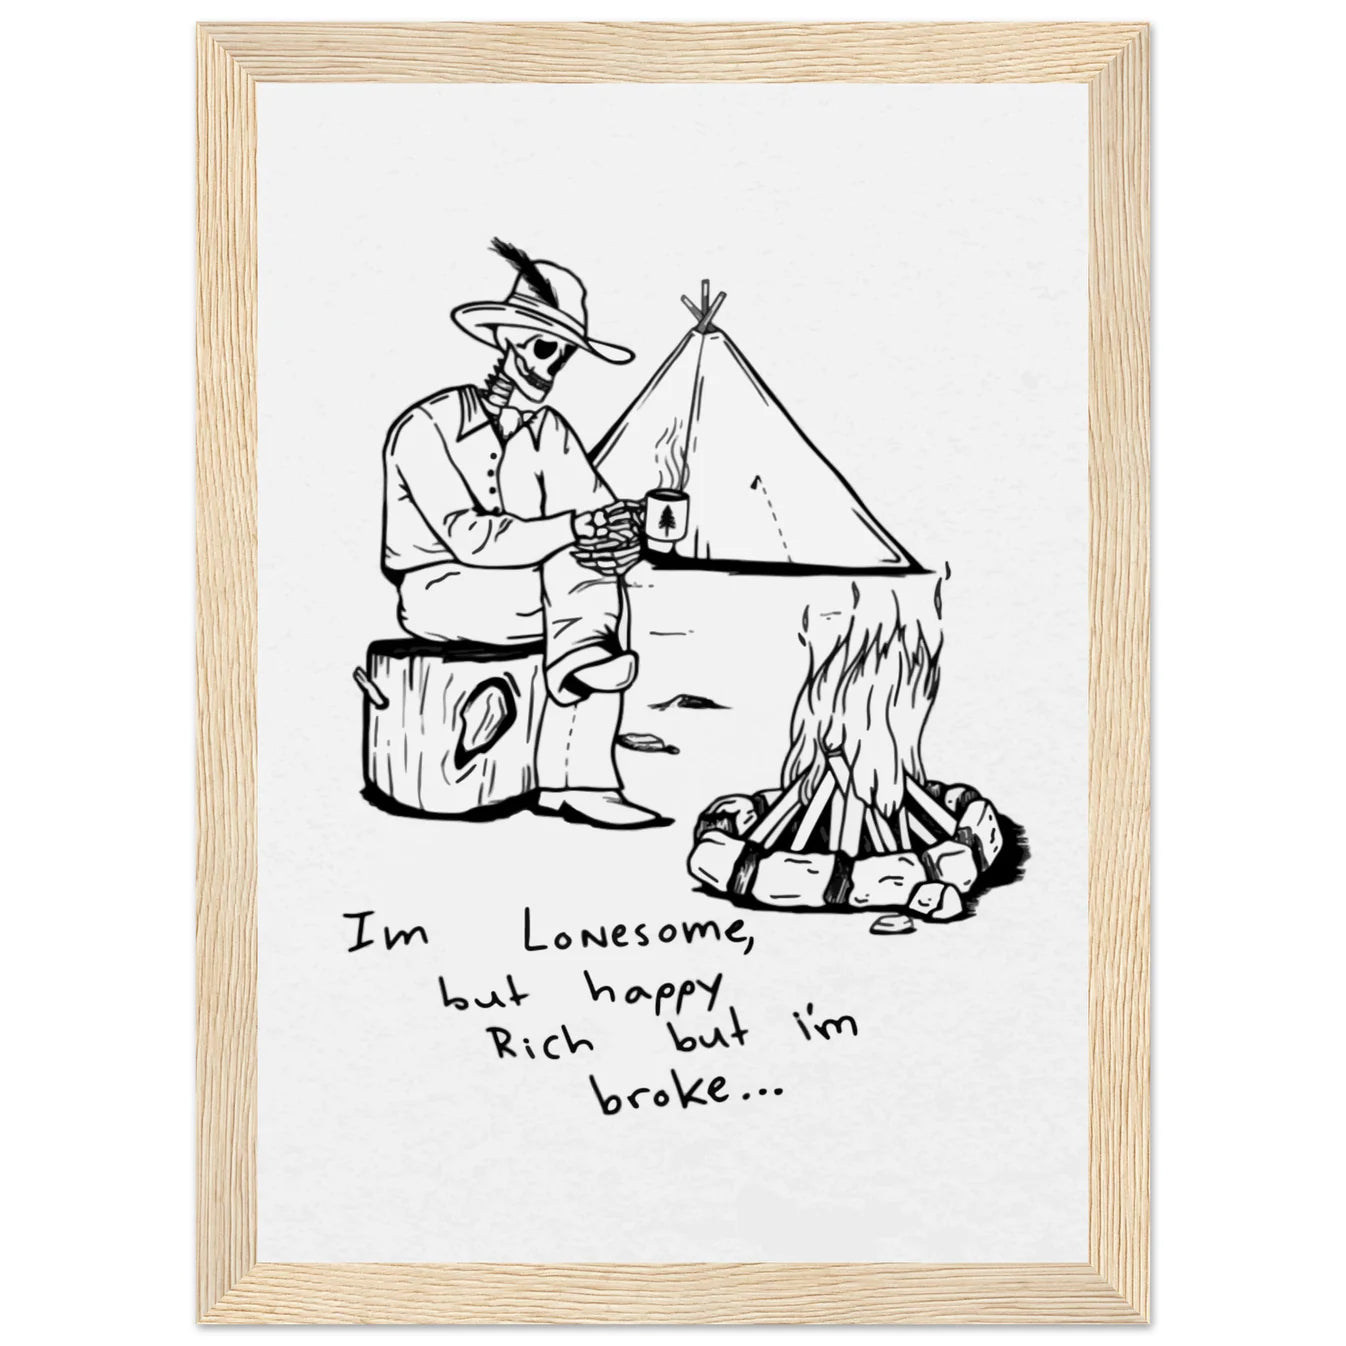 Colter Wall Inspired Camping Skeleton Wooden Framed Graphic Print